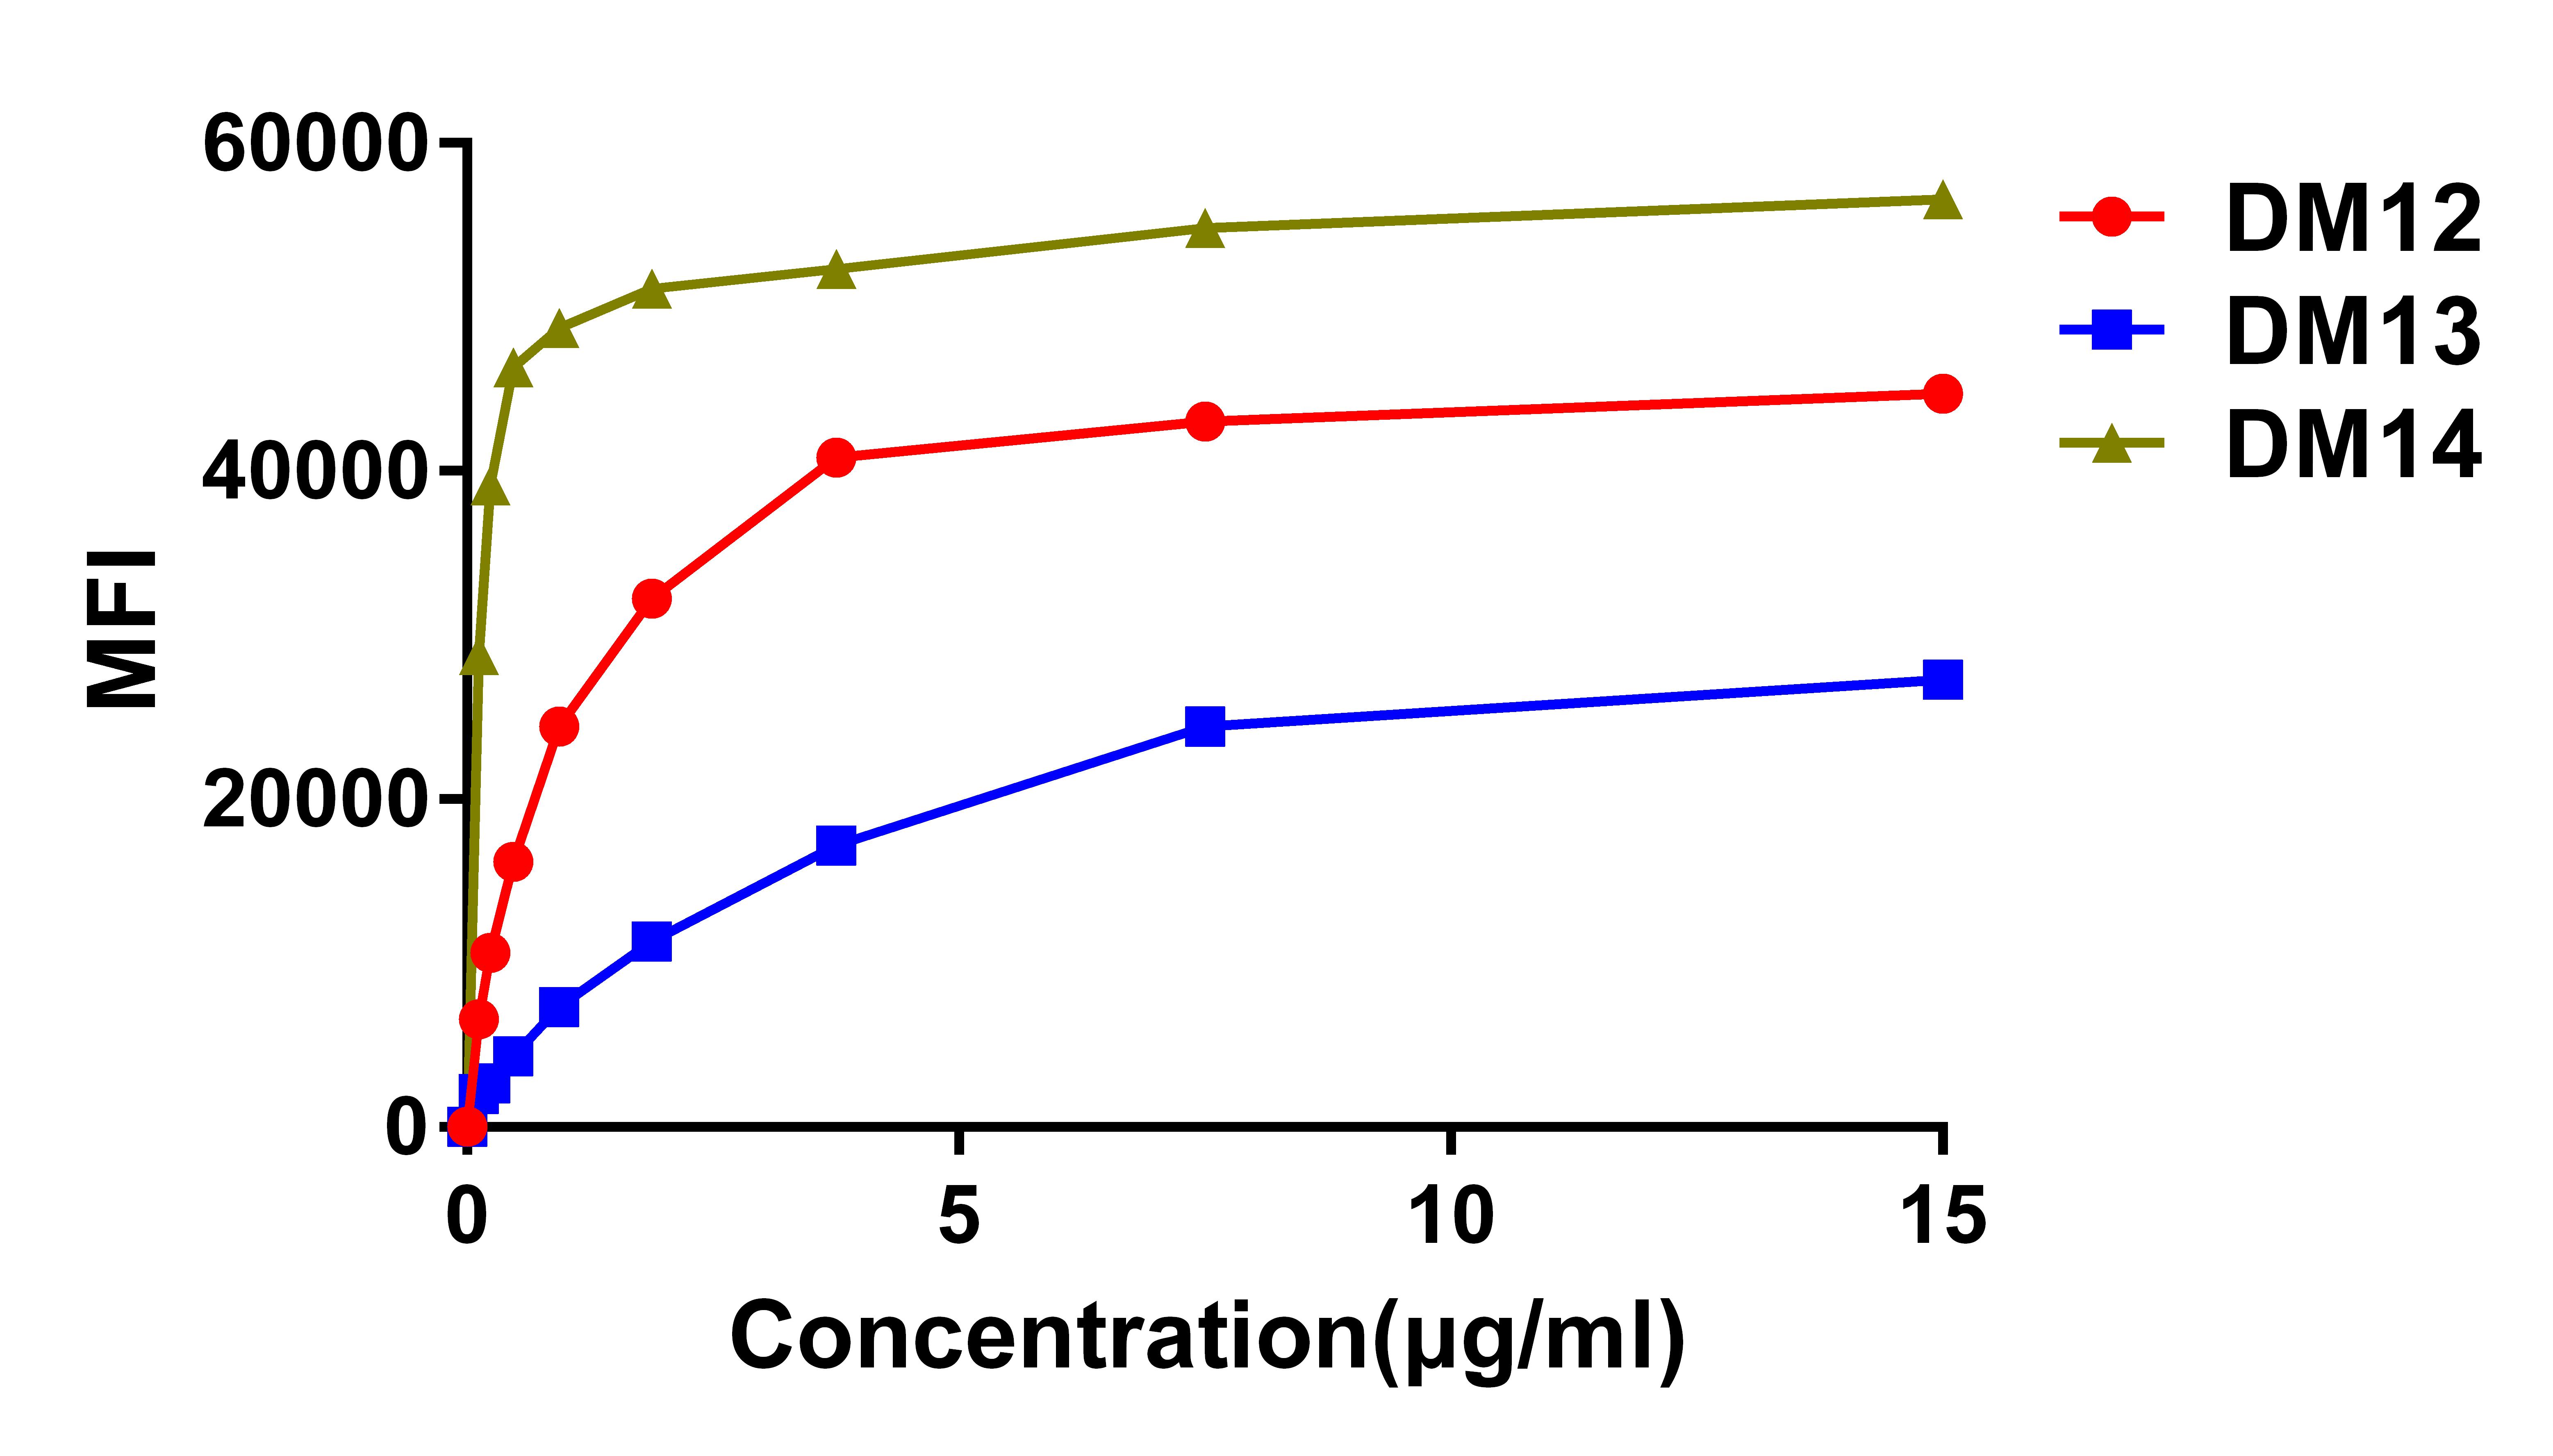 Figure 2. Affinity ranking of different Rabbit anti-CD22 mAb clones by titration of different concentration onto Raji cells. The Y-axis represents the mean fluorescence intensity (MFI) while the X-axis represents the concentration of IgG used.